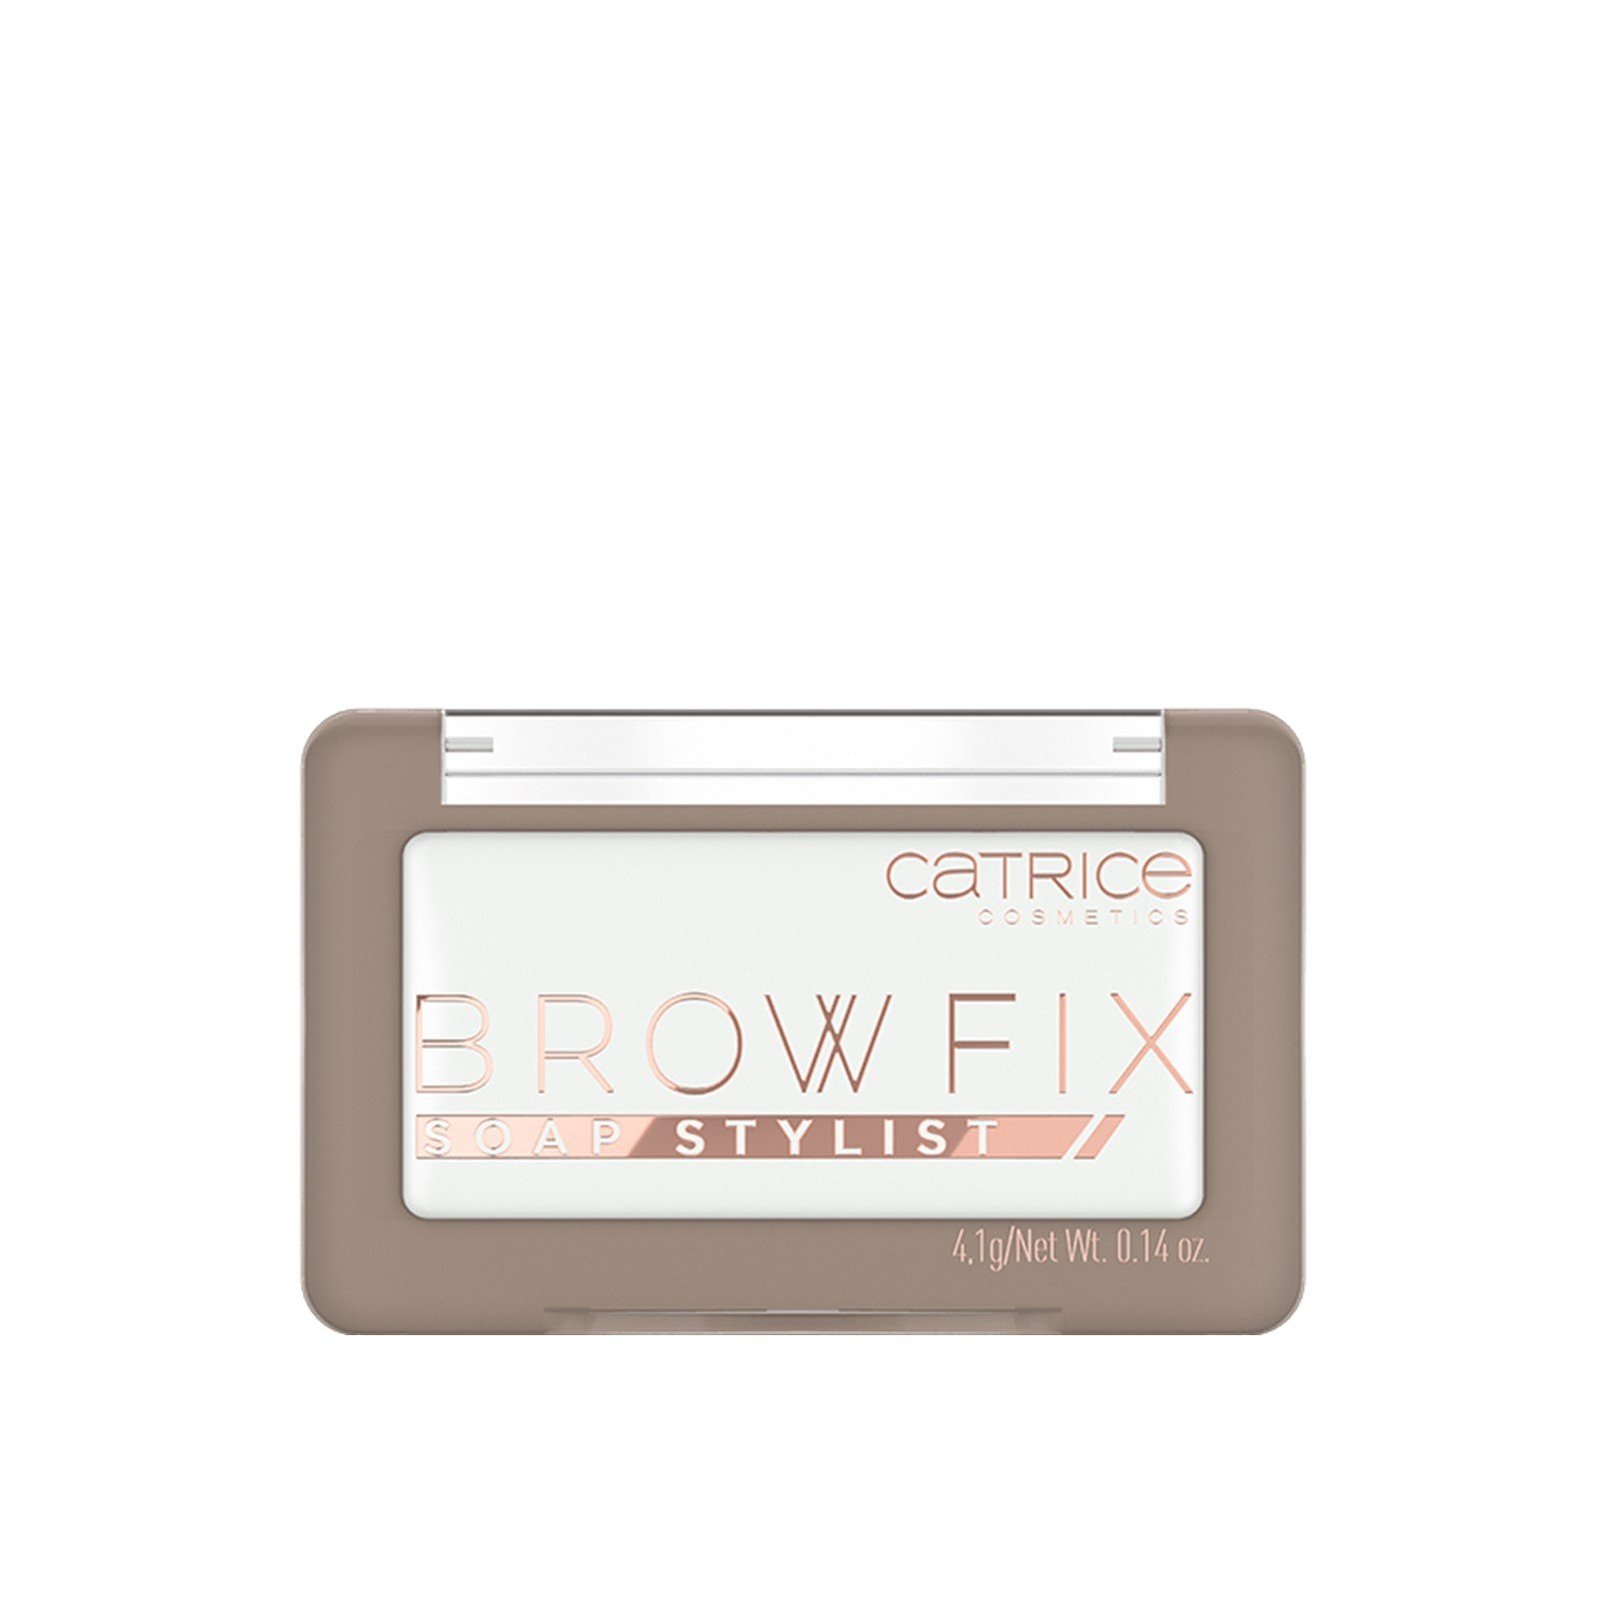 Fix 010 And Brow Catrice (0.14 Buy Stylist 4.1g · USA Fluffy Soap Full oz)